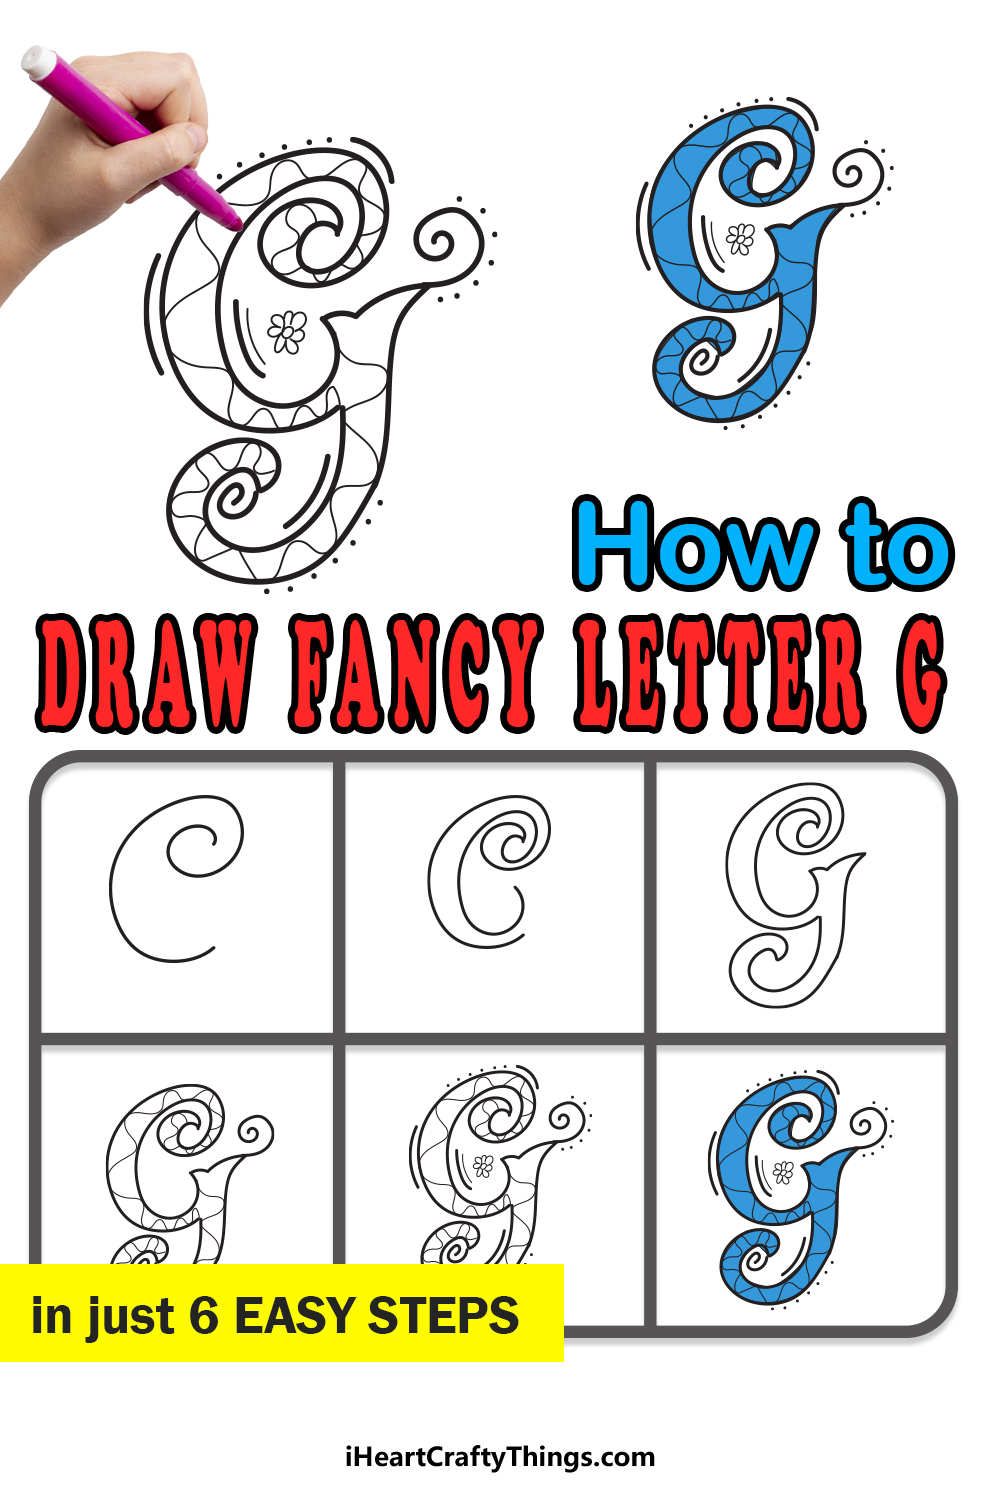 How To Draw Your Own Fancy G step by step guide